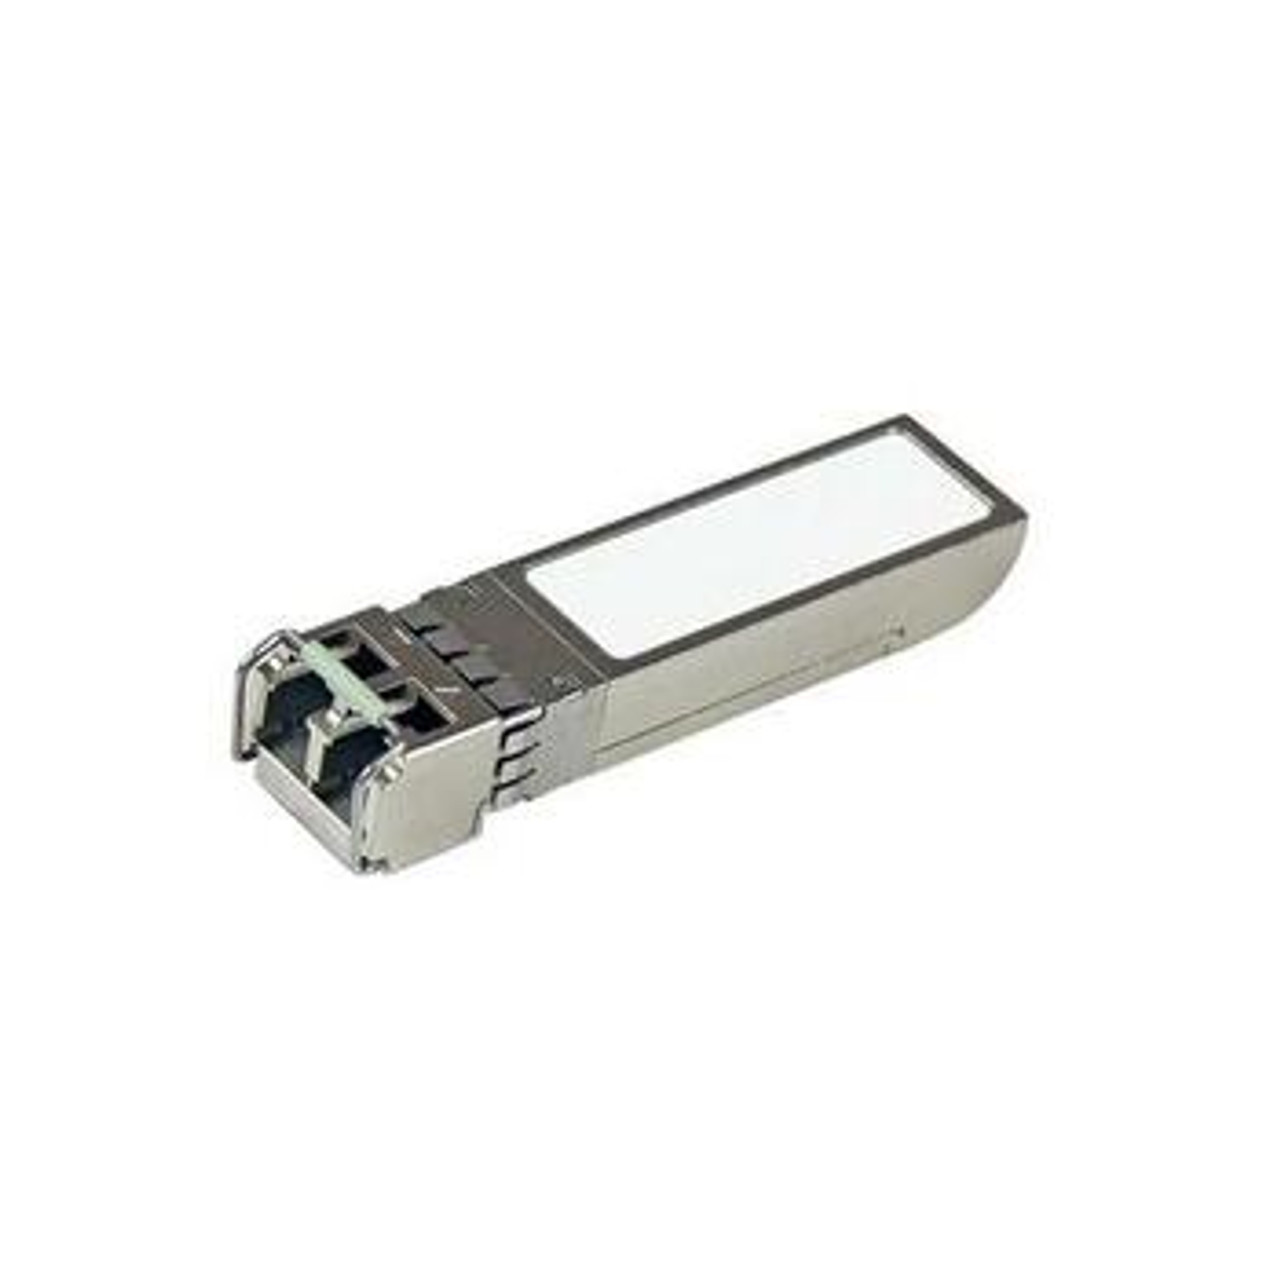 4050-00032 Extreme Networks 10/100/1000Base-T 850nm SFP (Mini-GBIC) Transceiver Module